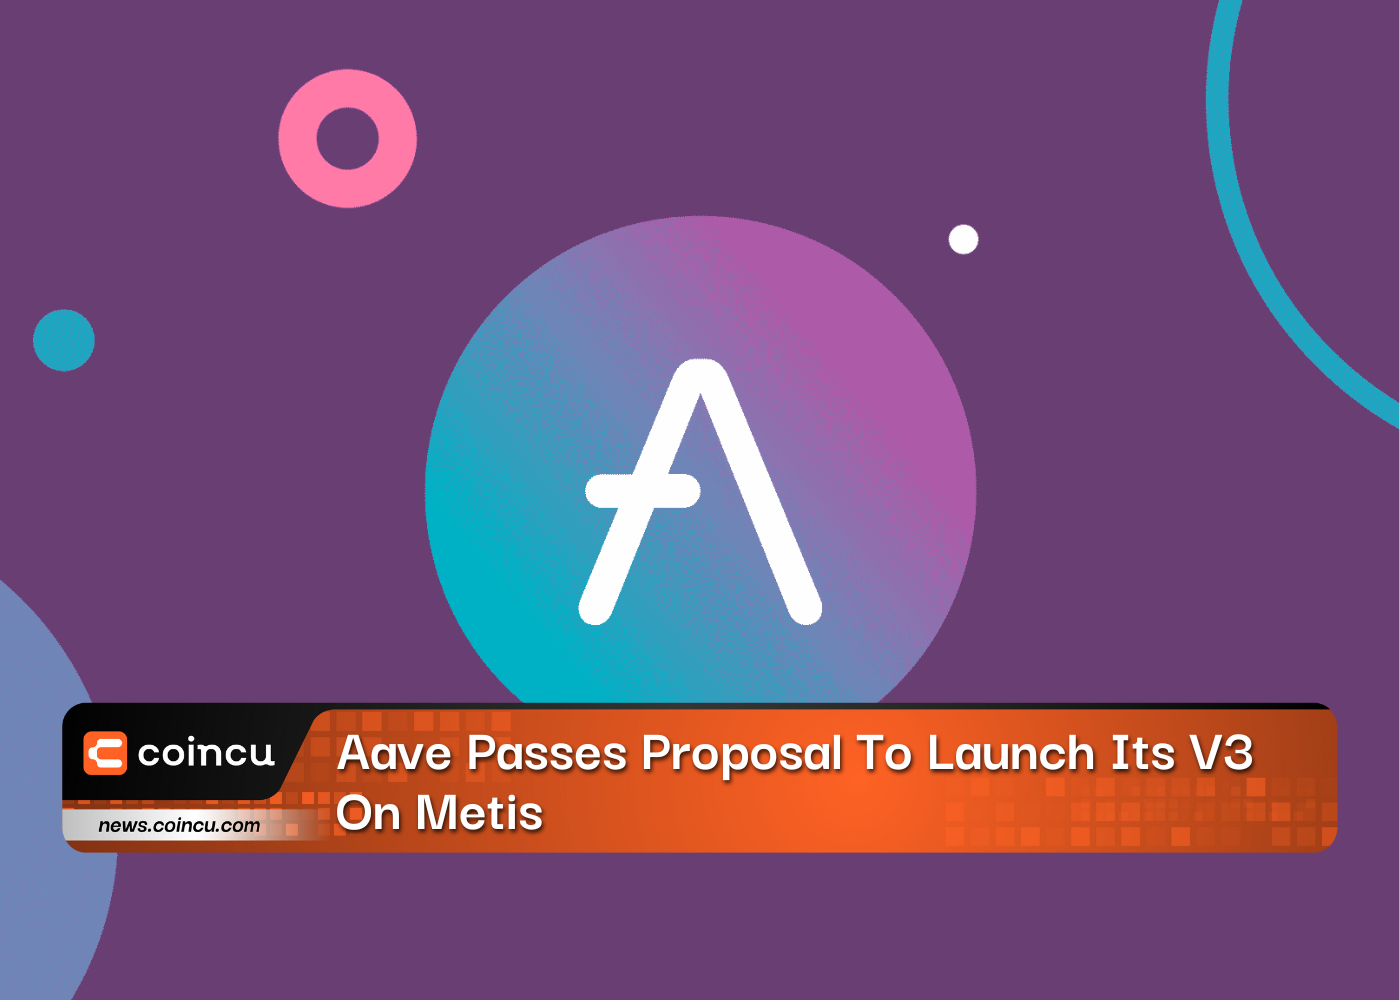 Aave Passes Proposal To Launch Its V3 On Metis